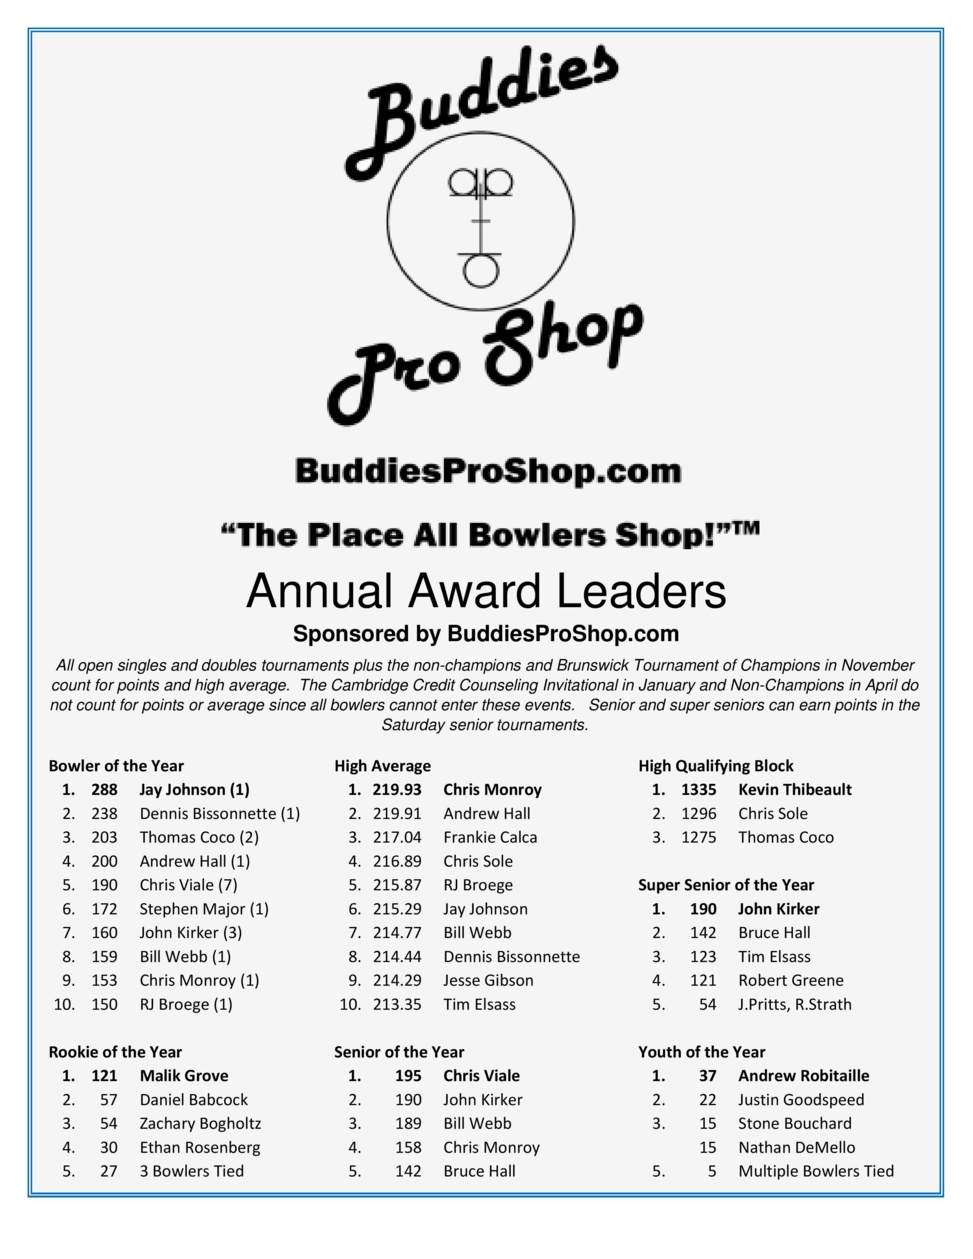 Current Stats & Annual Awards Leaders sponsored by BuddiesProShop.com